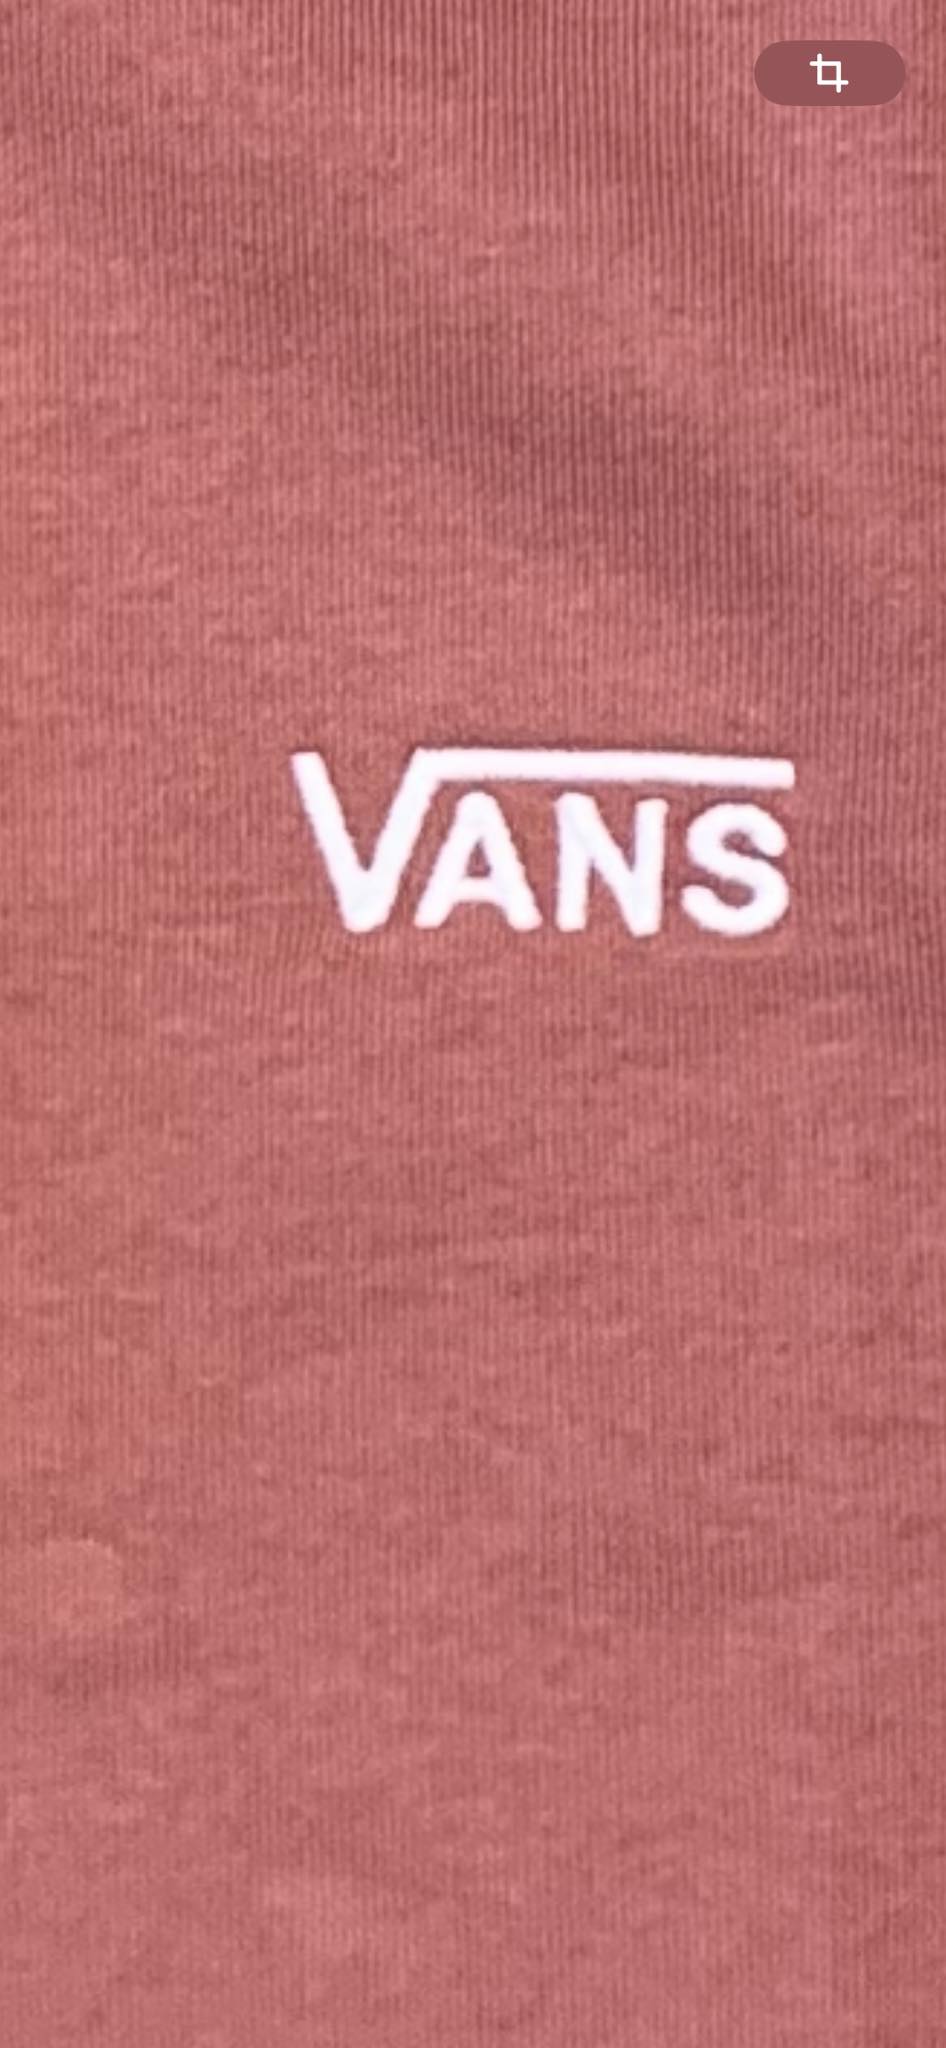 Vans Core Basic Hoodie - Withered Rose